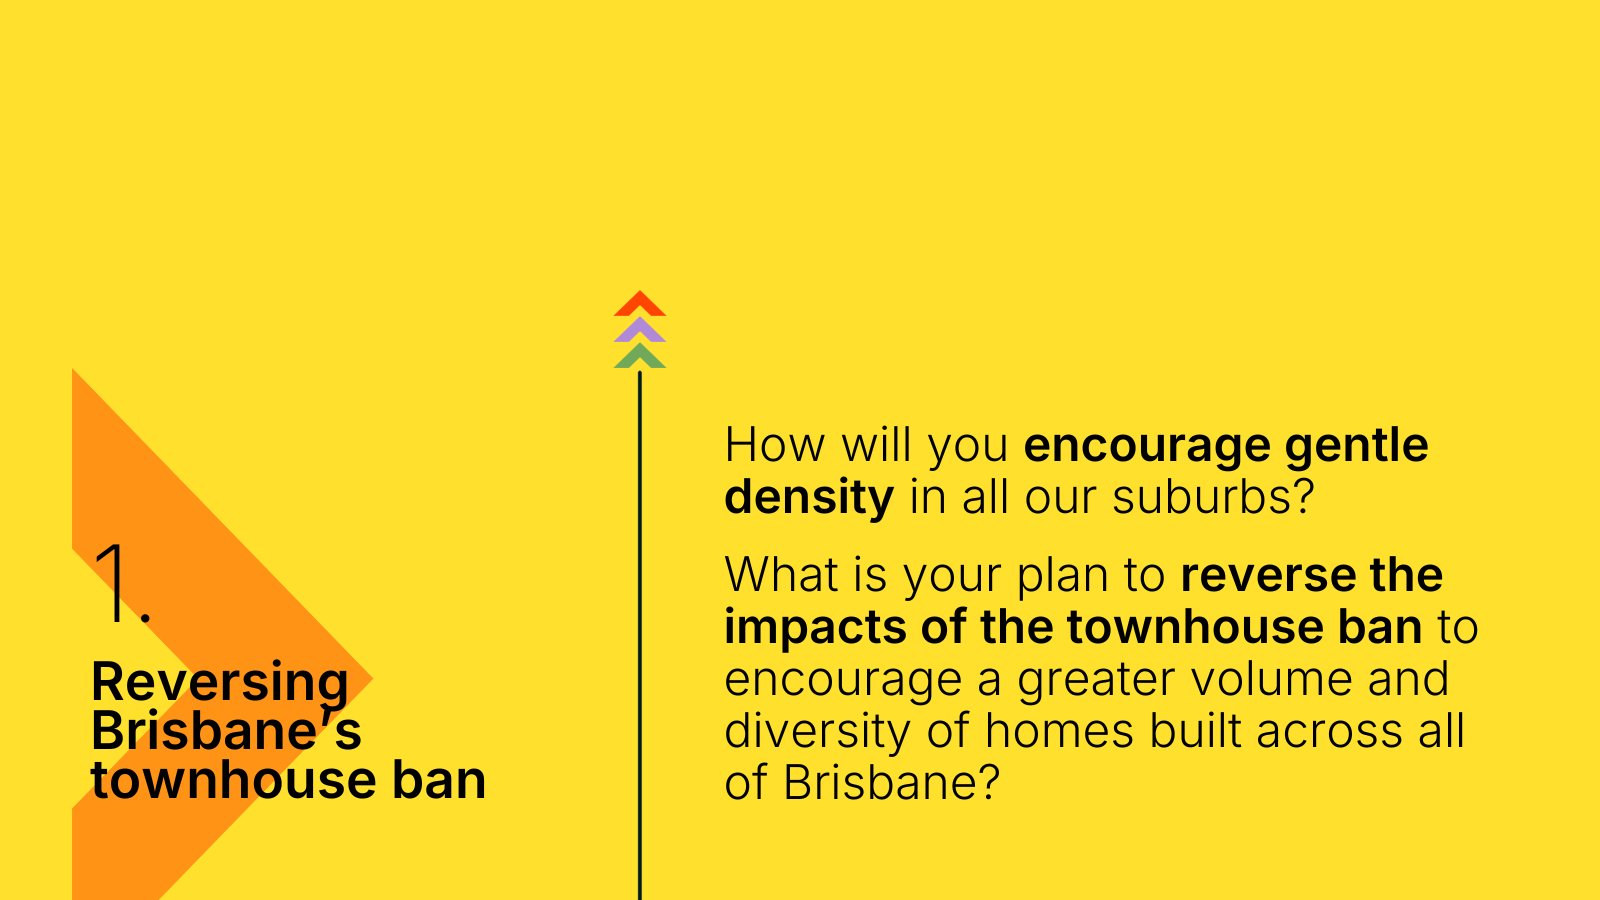 How will you encourage gentle density in all our suburbs? What is your plan to reverse the impacts of the townhouse ban to encourage a greater volume and diversity of homes built across all of Brisbane?